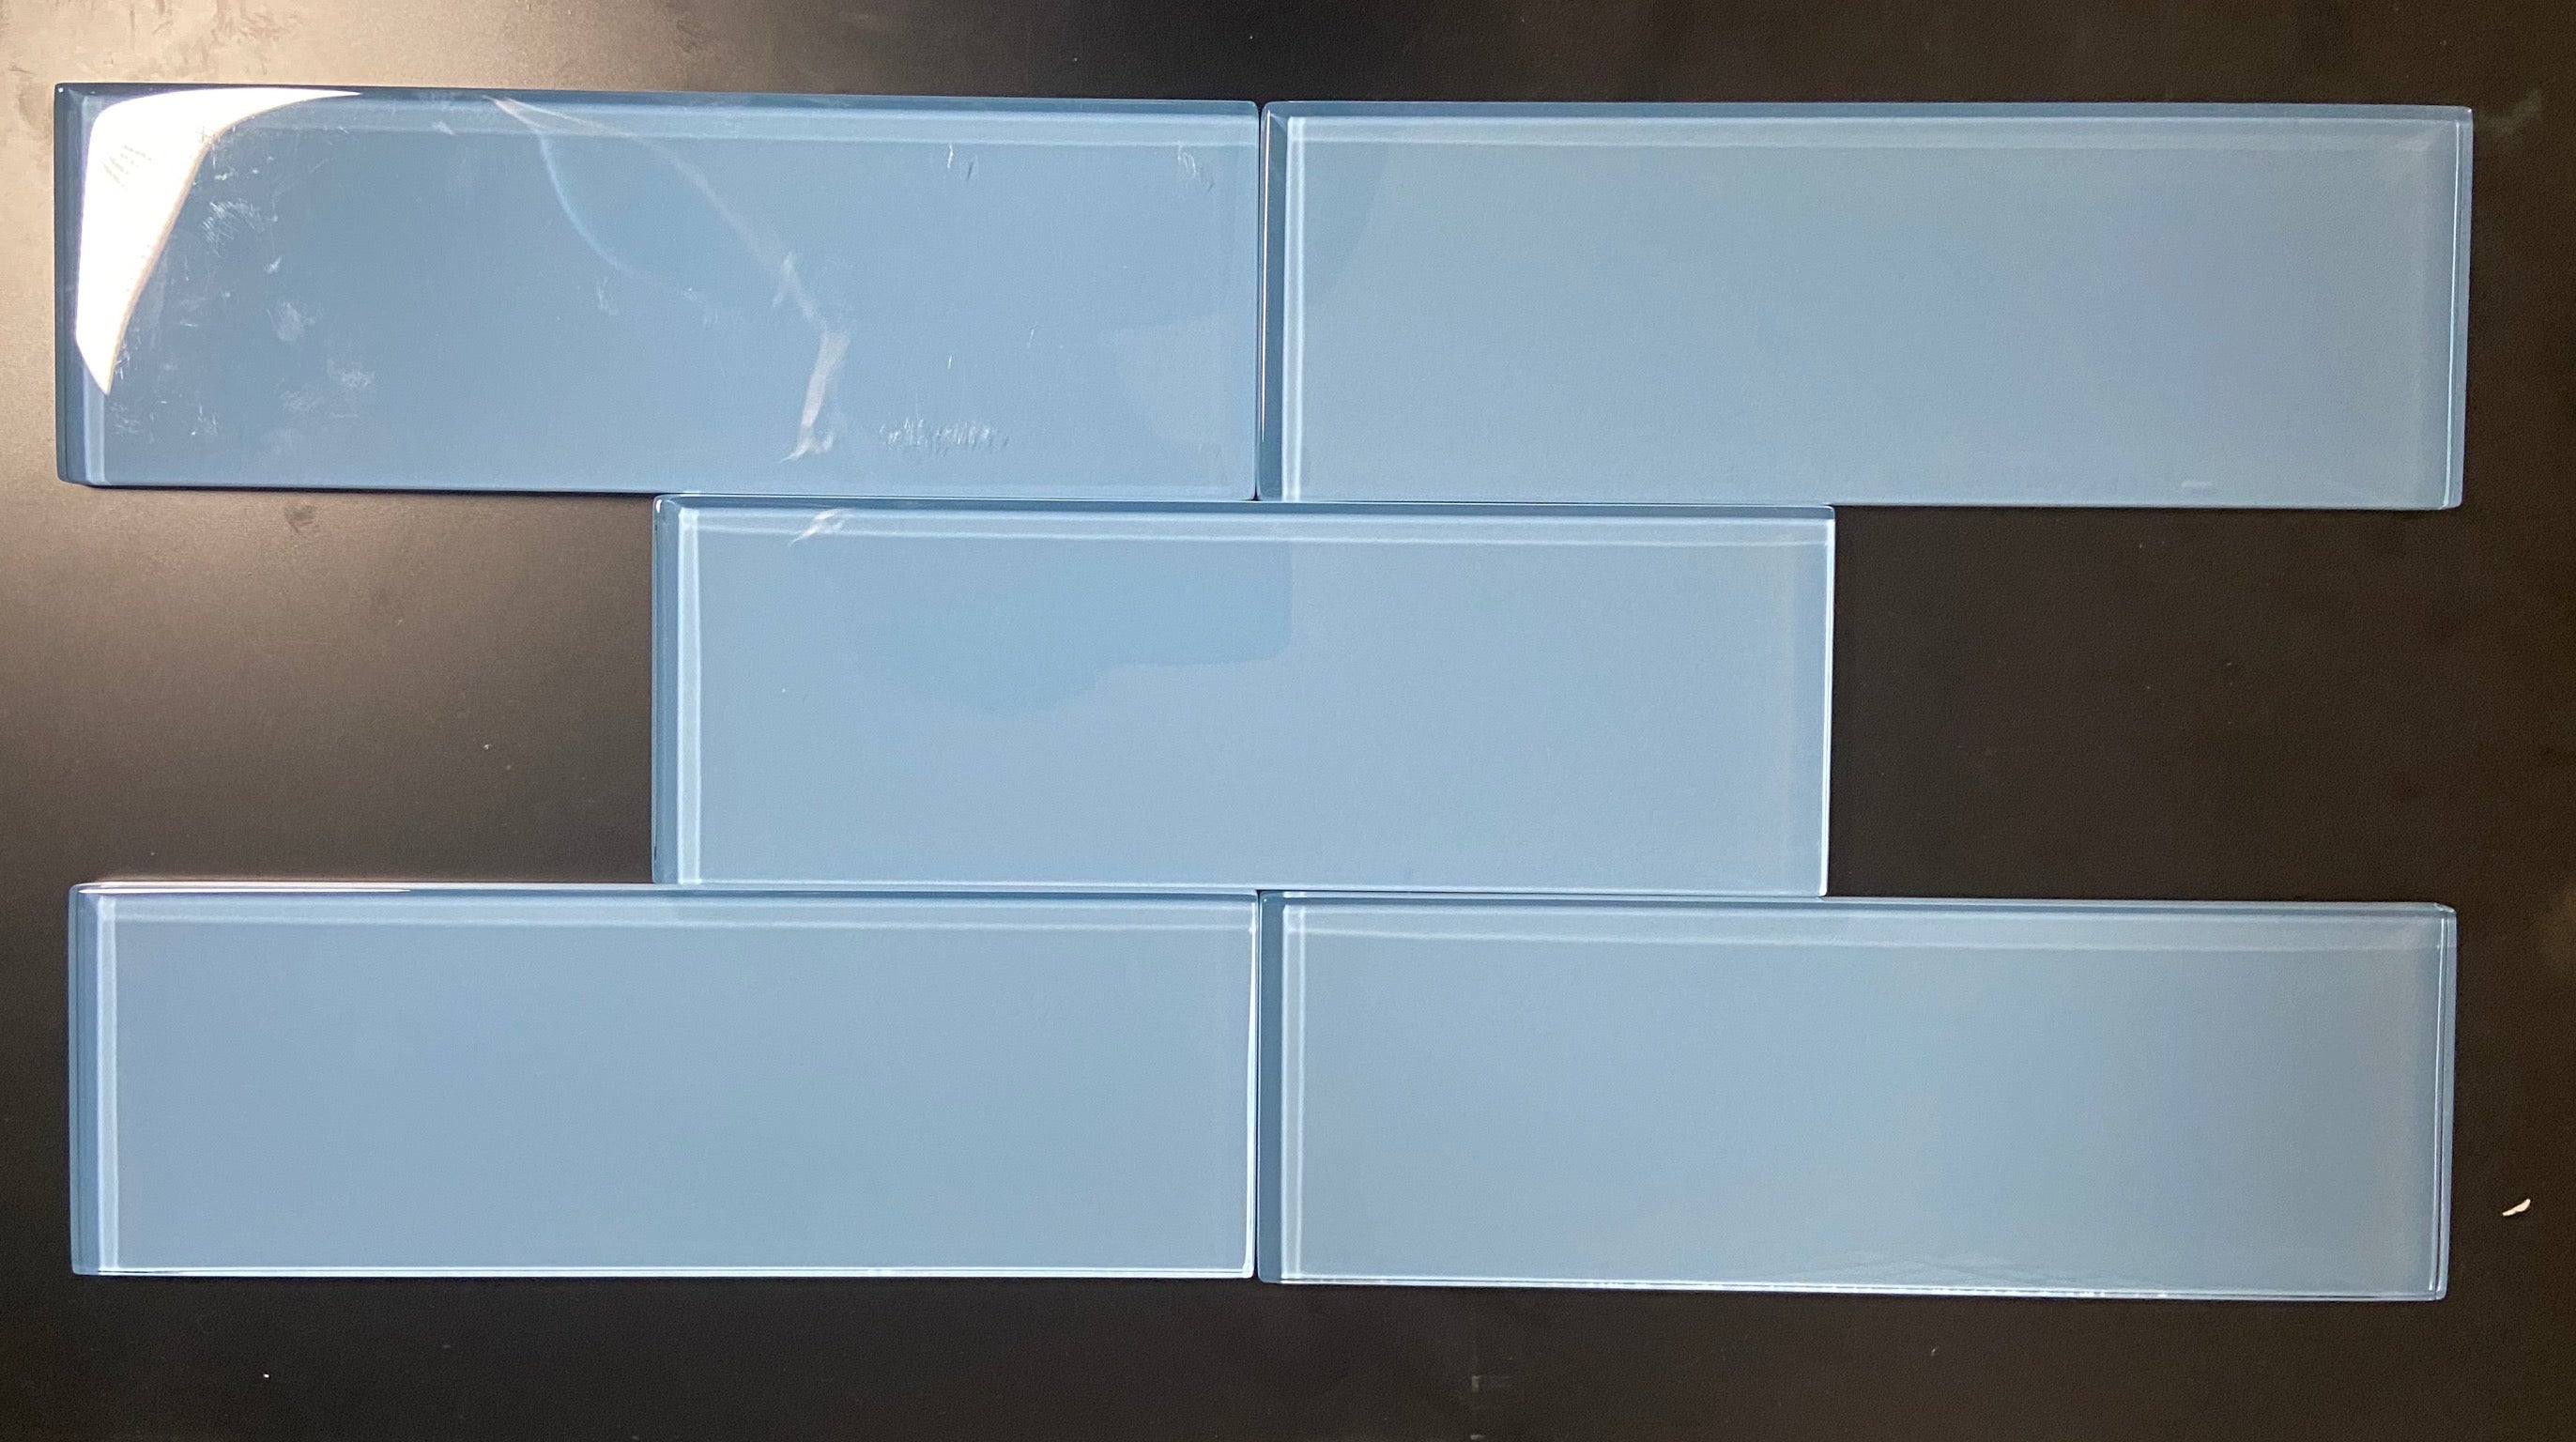 Premium Quality Pacific Blue 3x9 Glass Subway Tile for Bathroom Walls, Kitchen Backsplashes By Vogue Tile - Tenedos